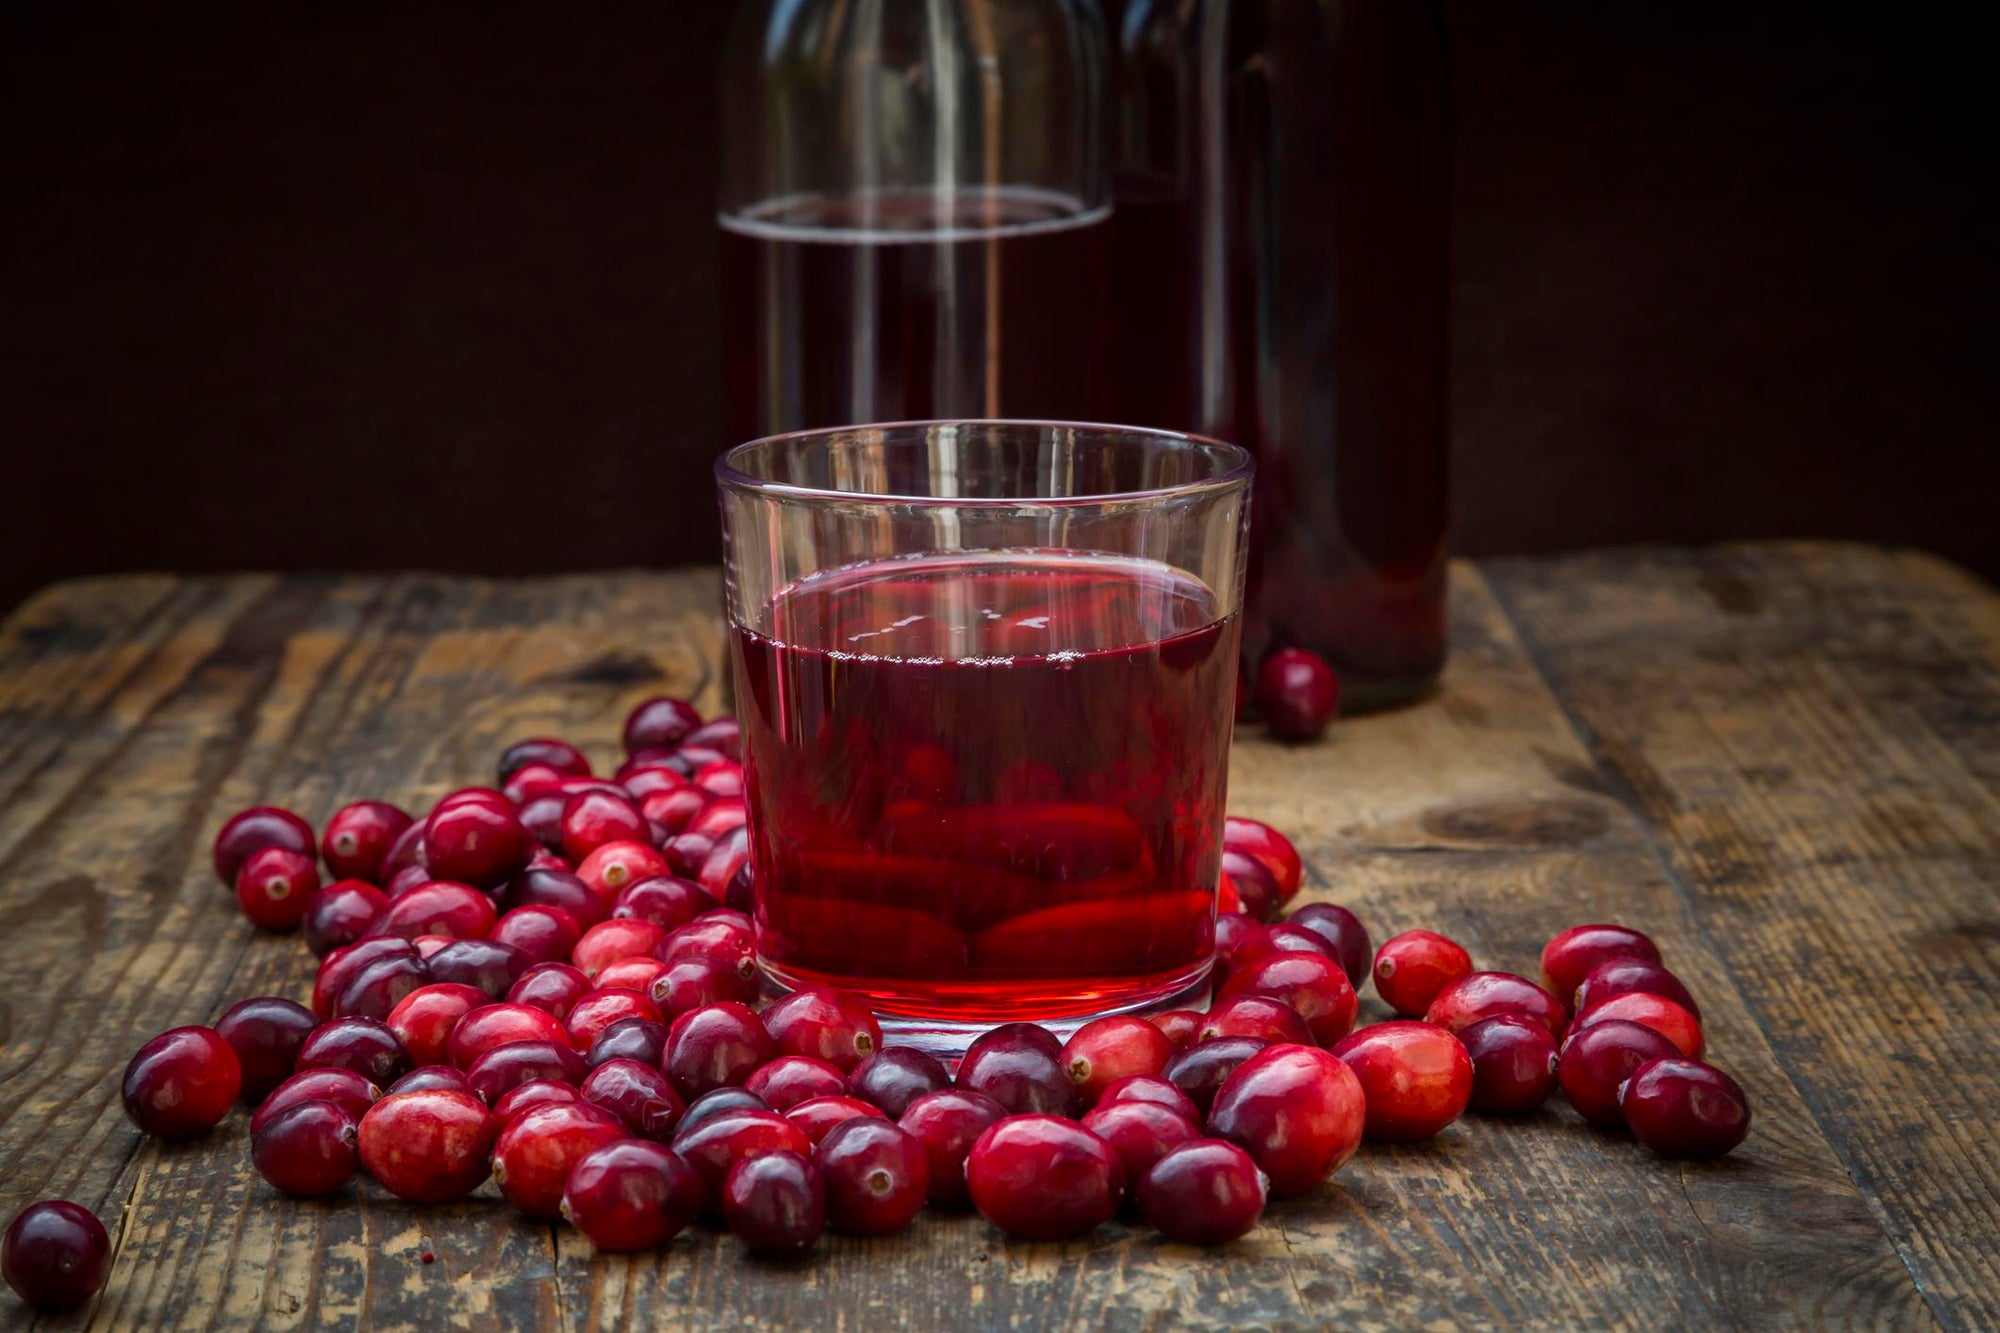 Cranberry Juice Can't Prevent or Treat UTIs, Health Experts Say